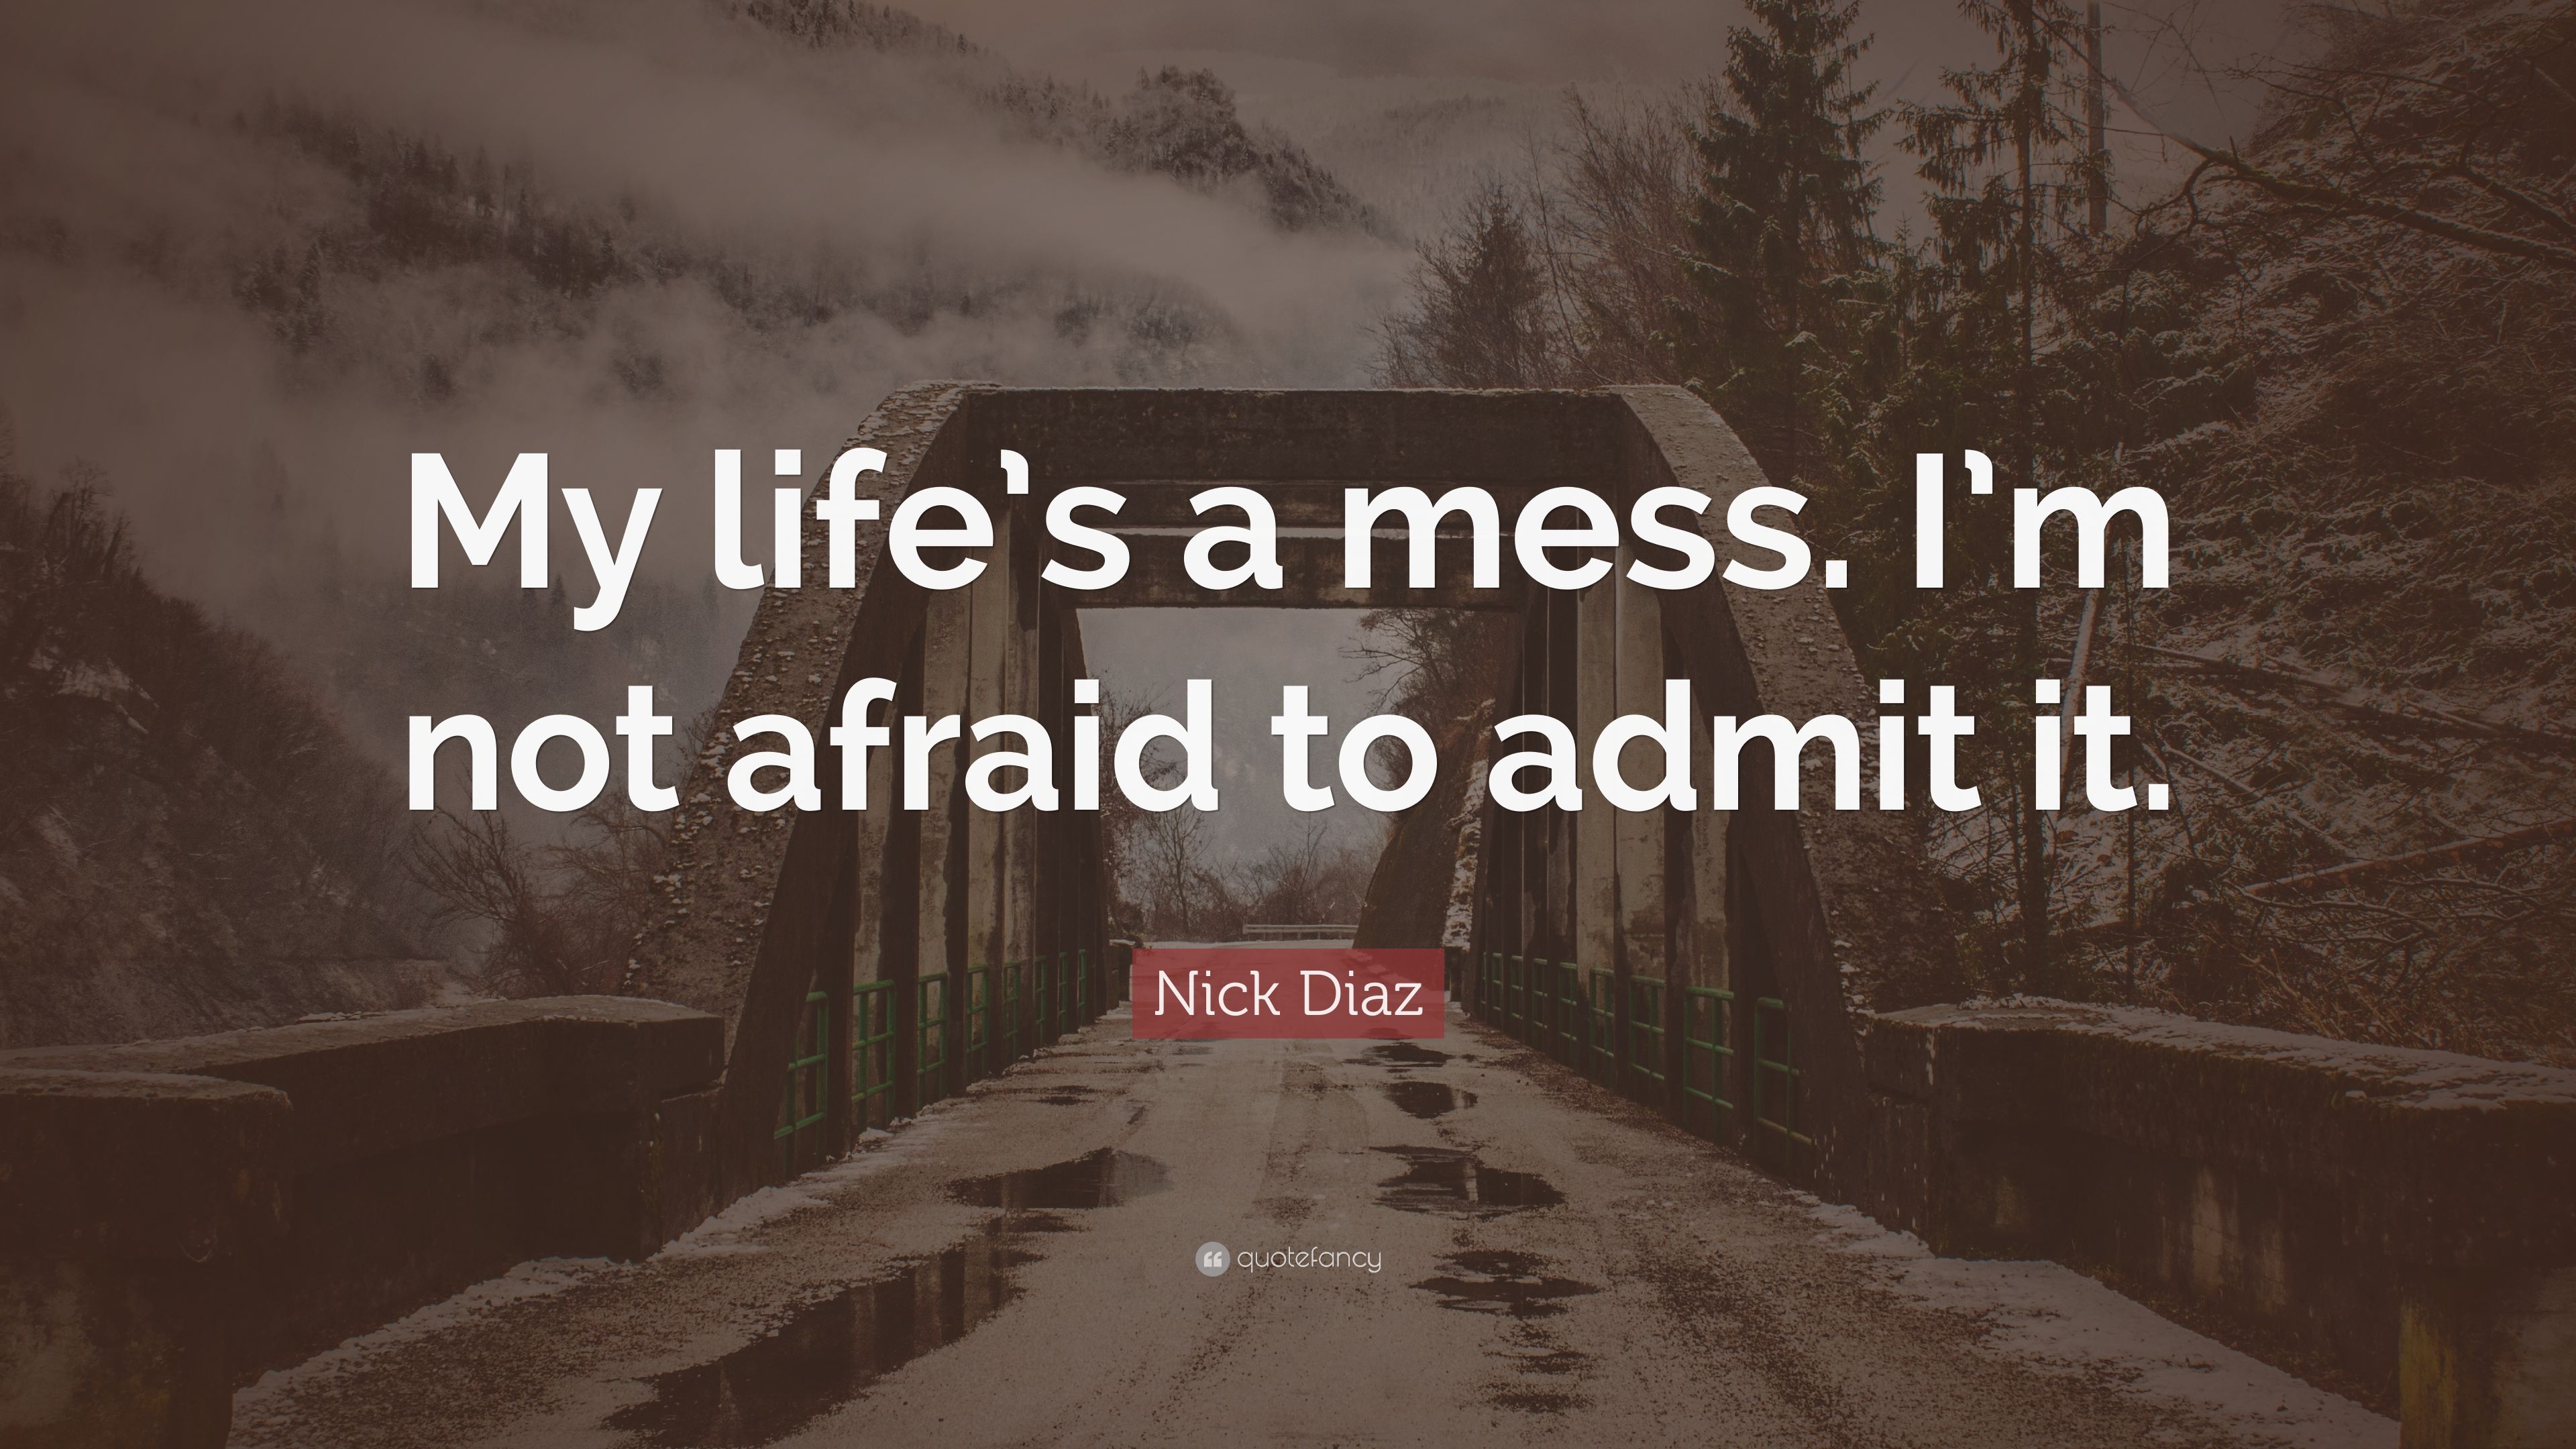 Nick Diaz Quote: “My life's a mess. I'm not afraid to admit it.” (7 wallpaper)